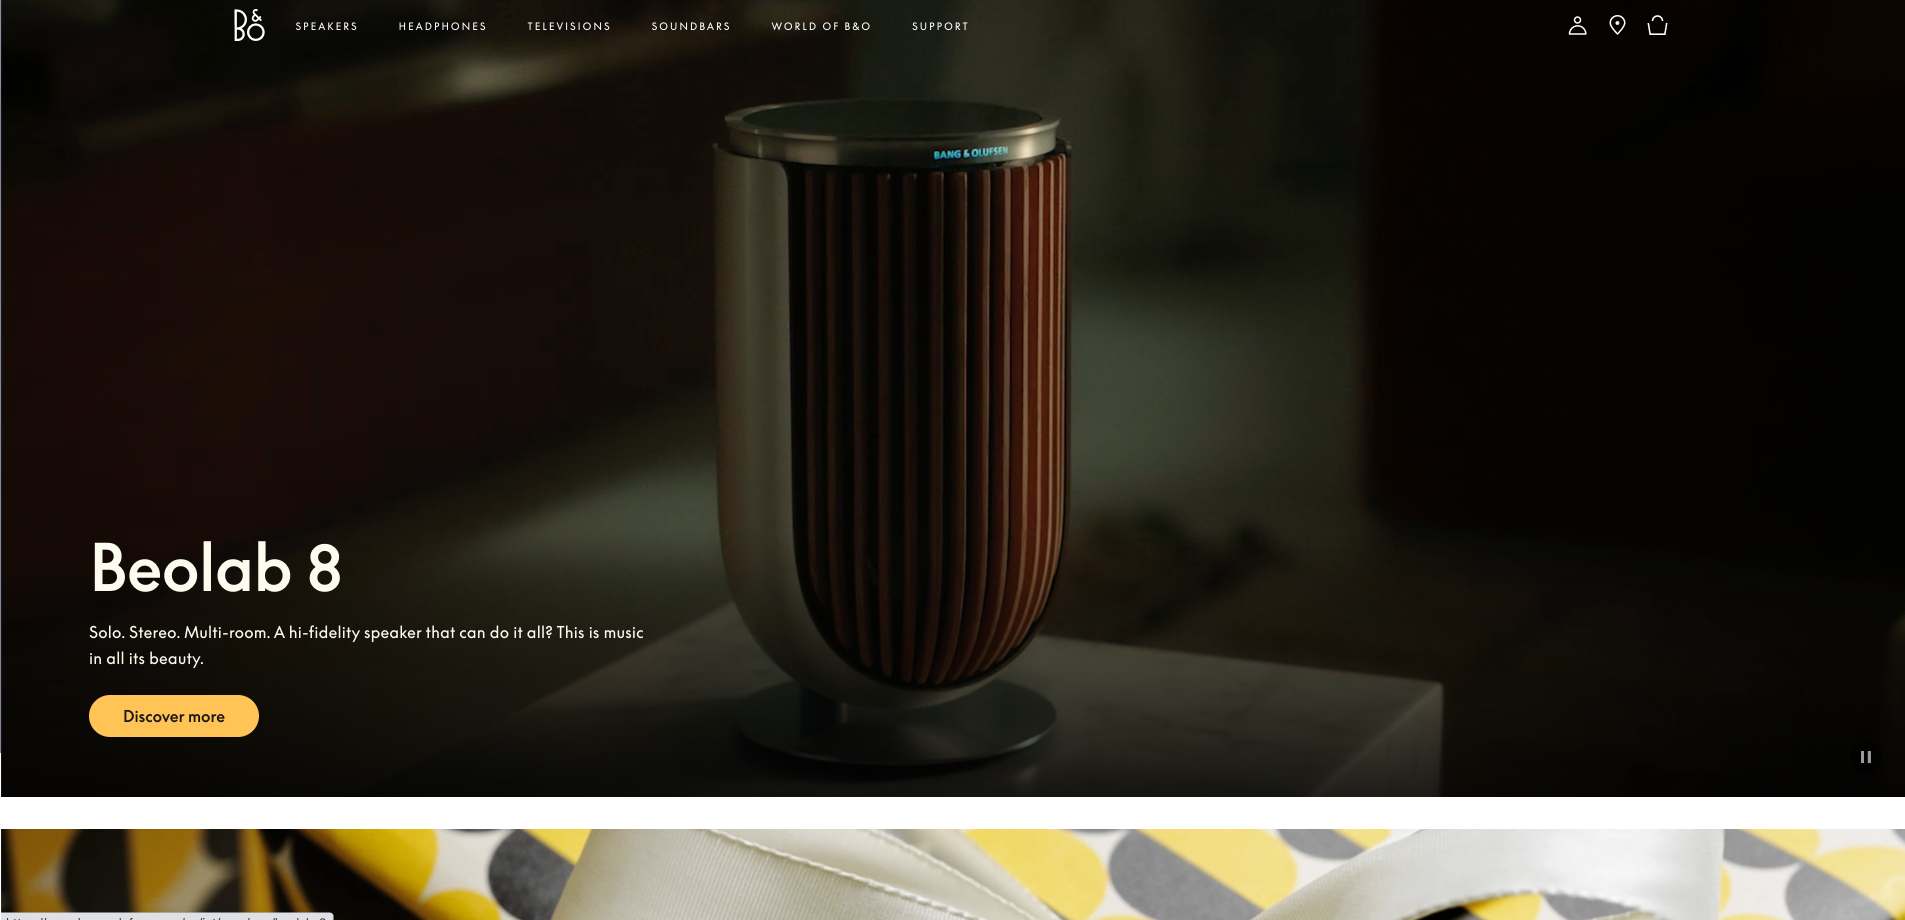 Bang & Olufsen's technology website uses mesmerizing video and photos to capture users' attention.